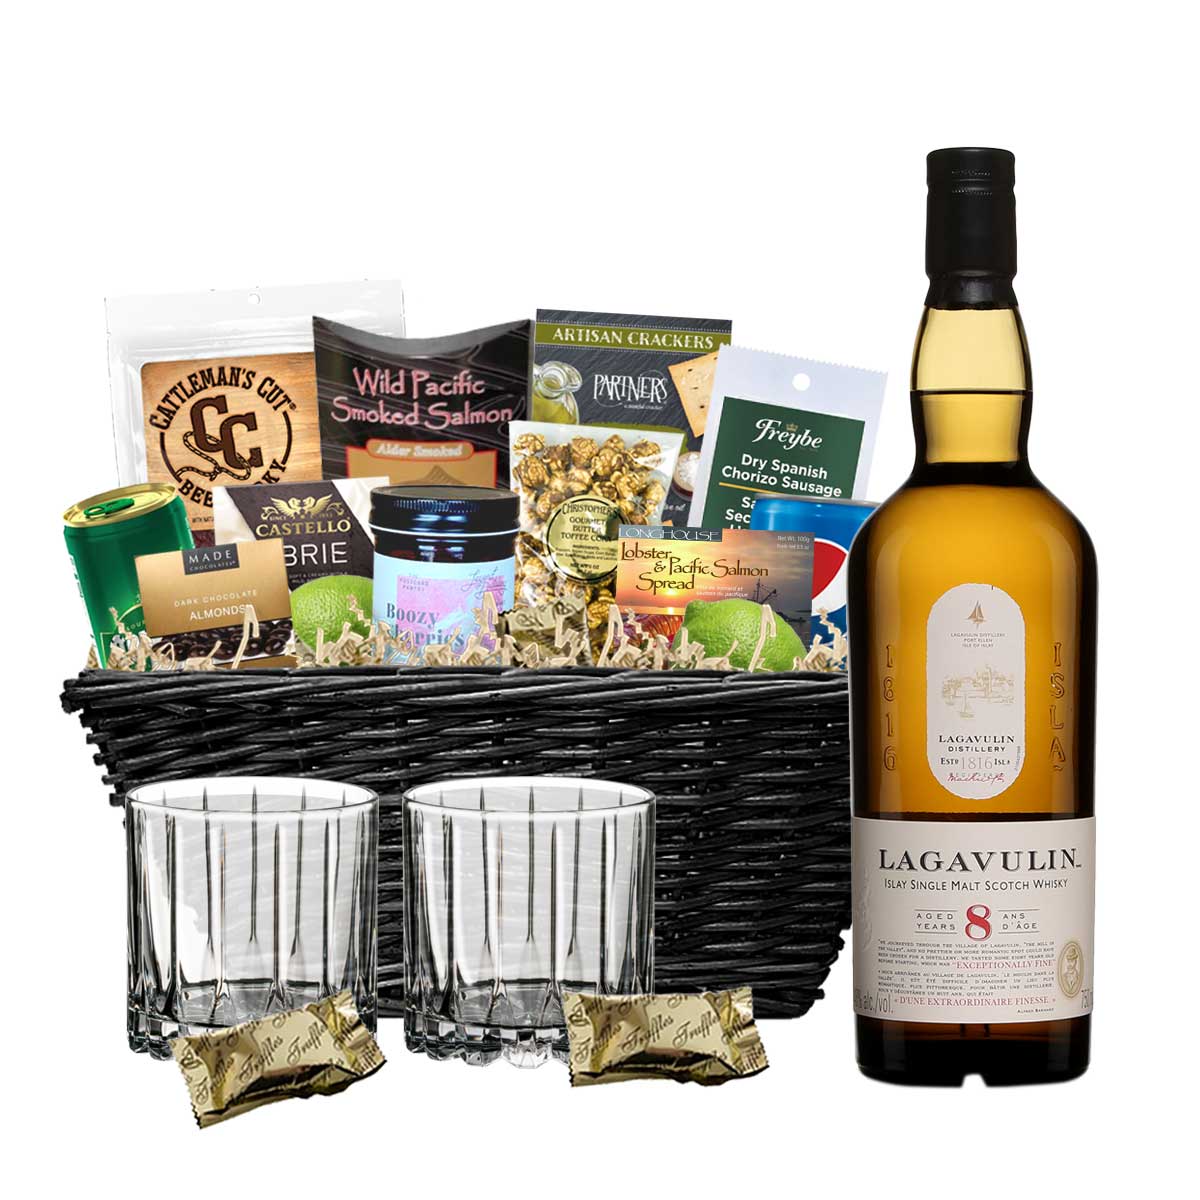 TAG Liquor Stores BC - Lagavulin 8 Year Old Scotch Whisky 750ml Gift Basket